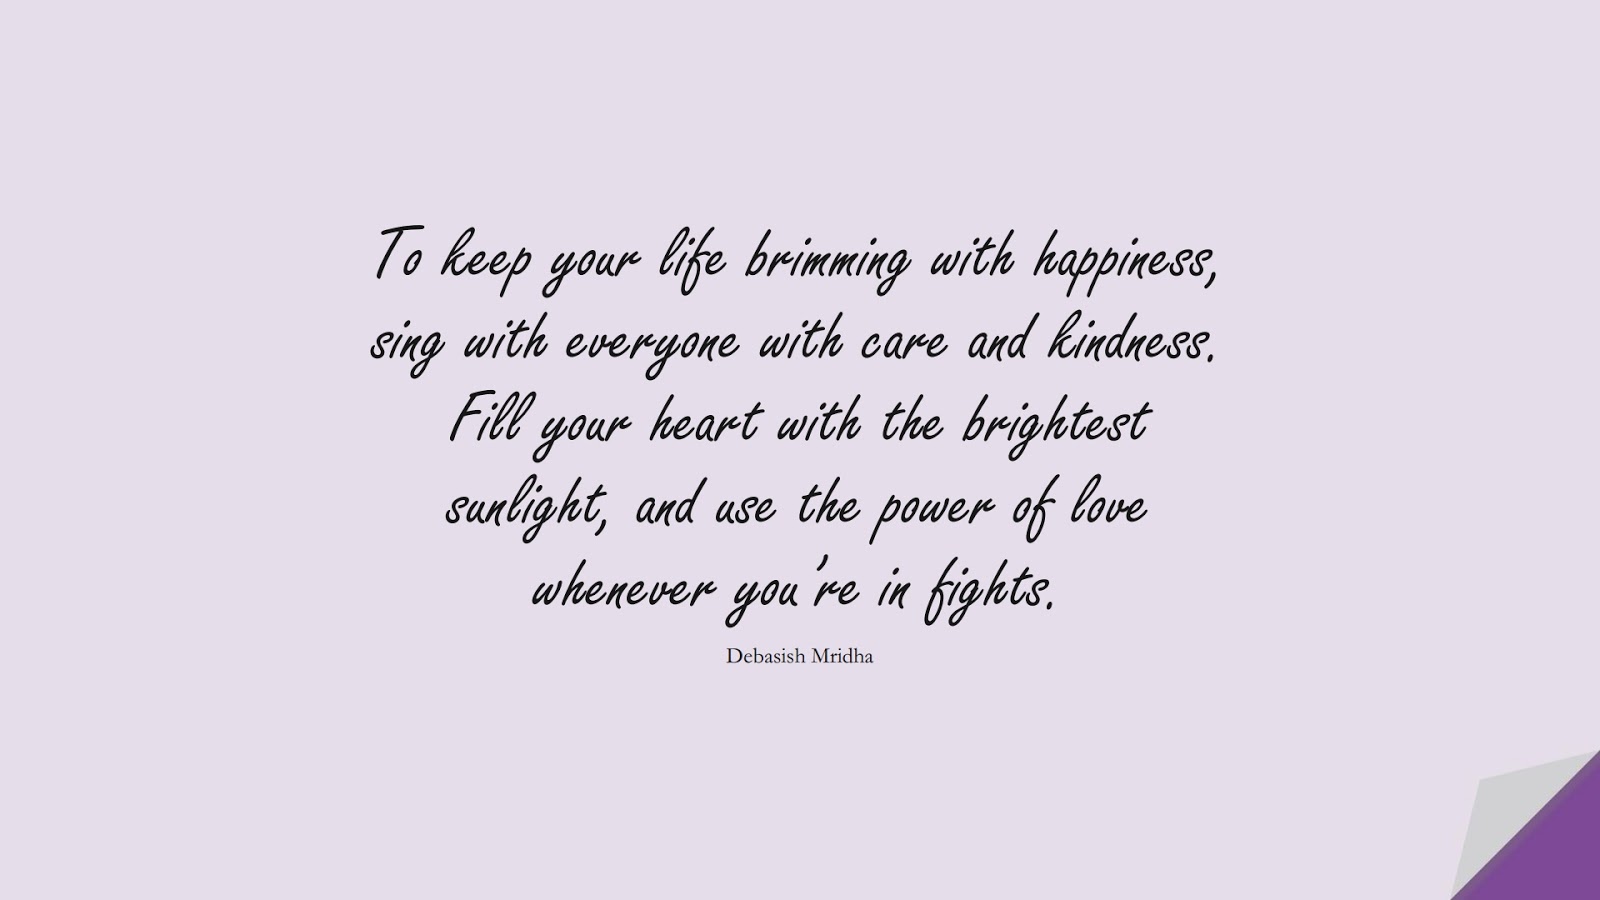 To keep your life brimming with happiness, sing with everyone with care and kindness. Fill your heart with the brightest sunlight, and use the power of love whenever you’re in fights. (Debasish Mridha);  #HappinessQuotes